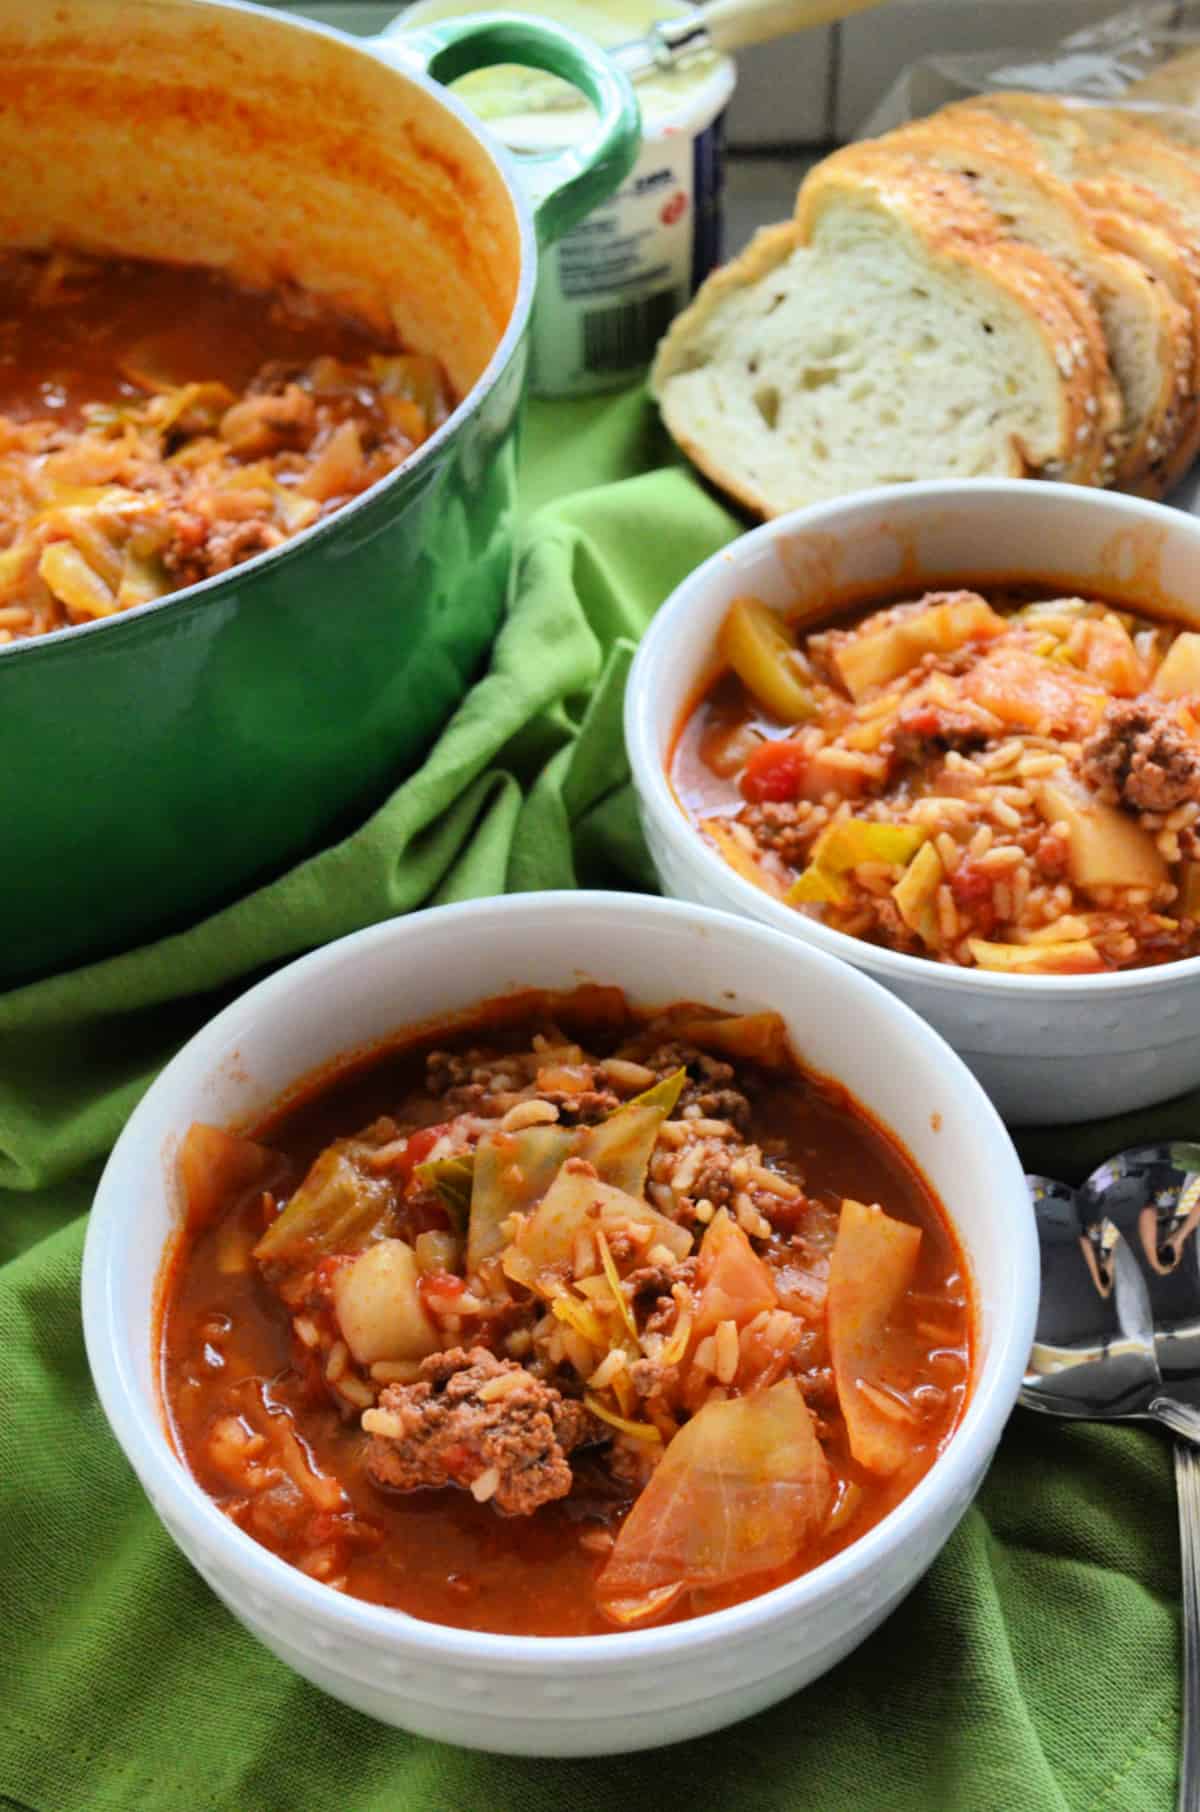 two white bowls with stuffed cabbage soup on green fabric with a pot of soup and slices of bread in the background.